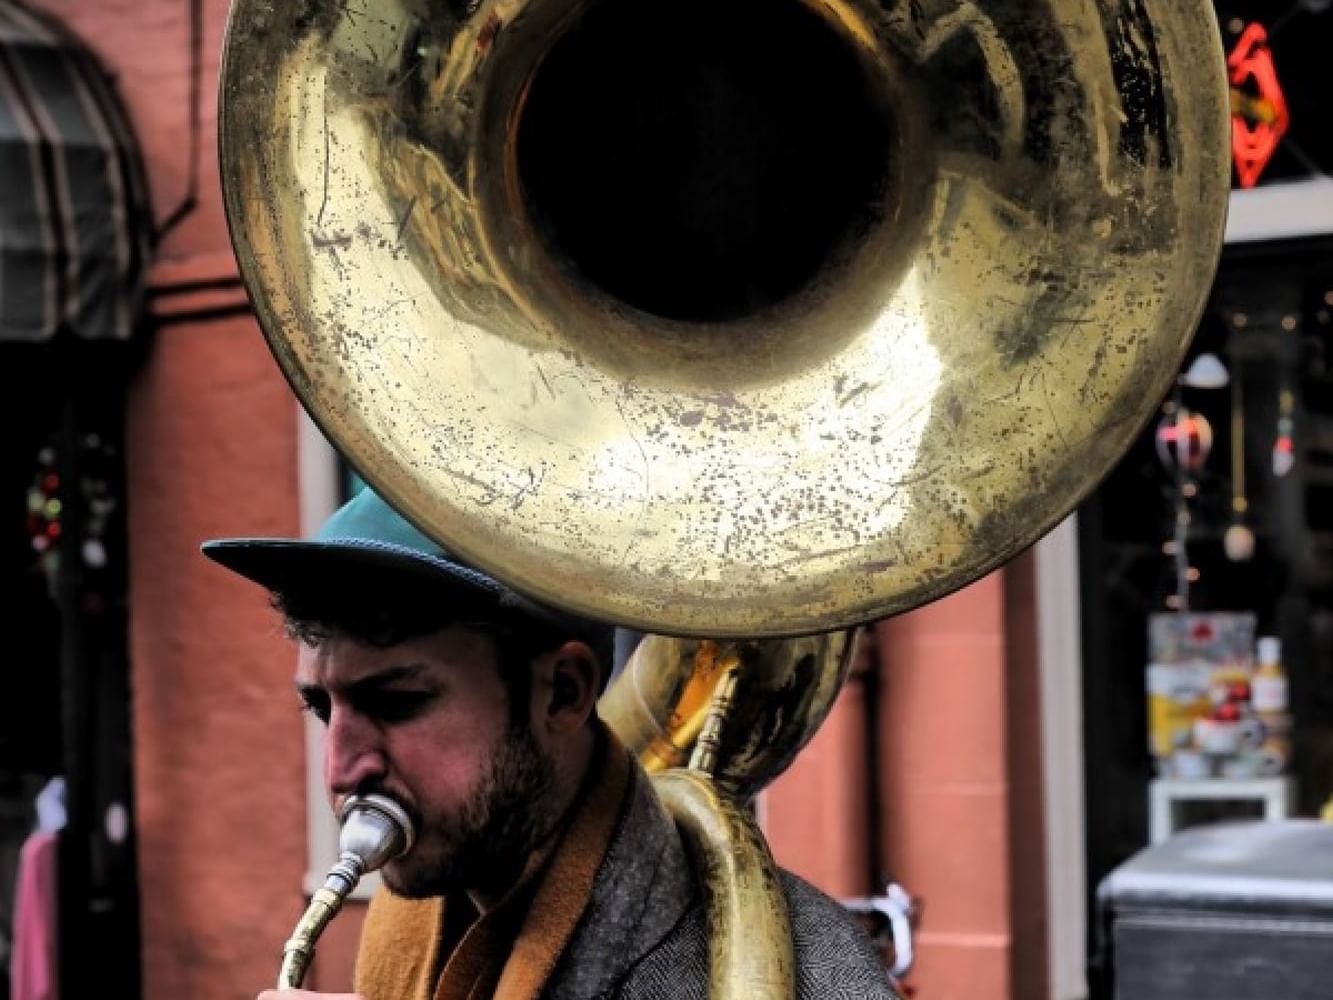 A man playing a tuba in the streets near La Galerie Hotel